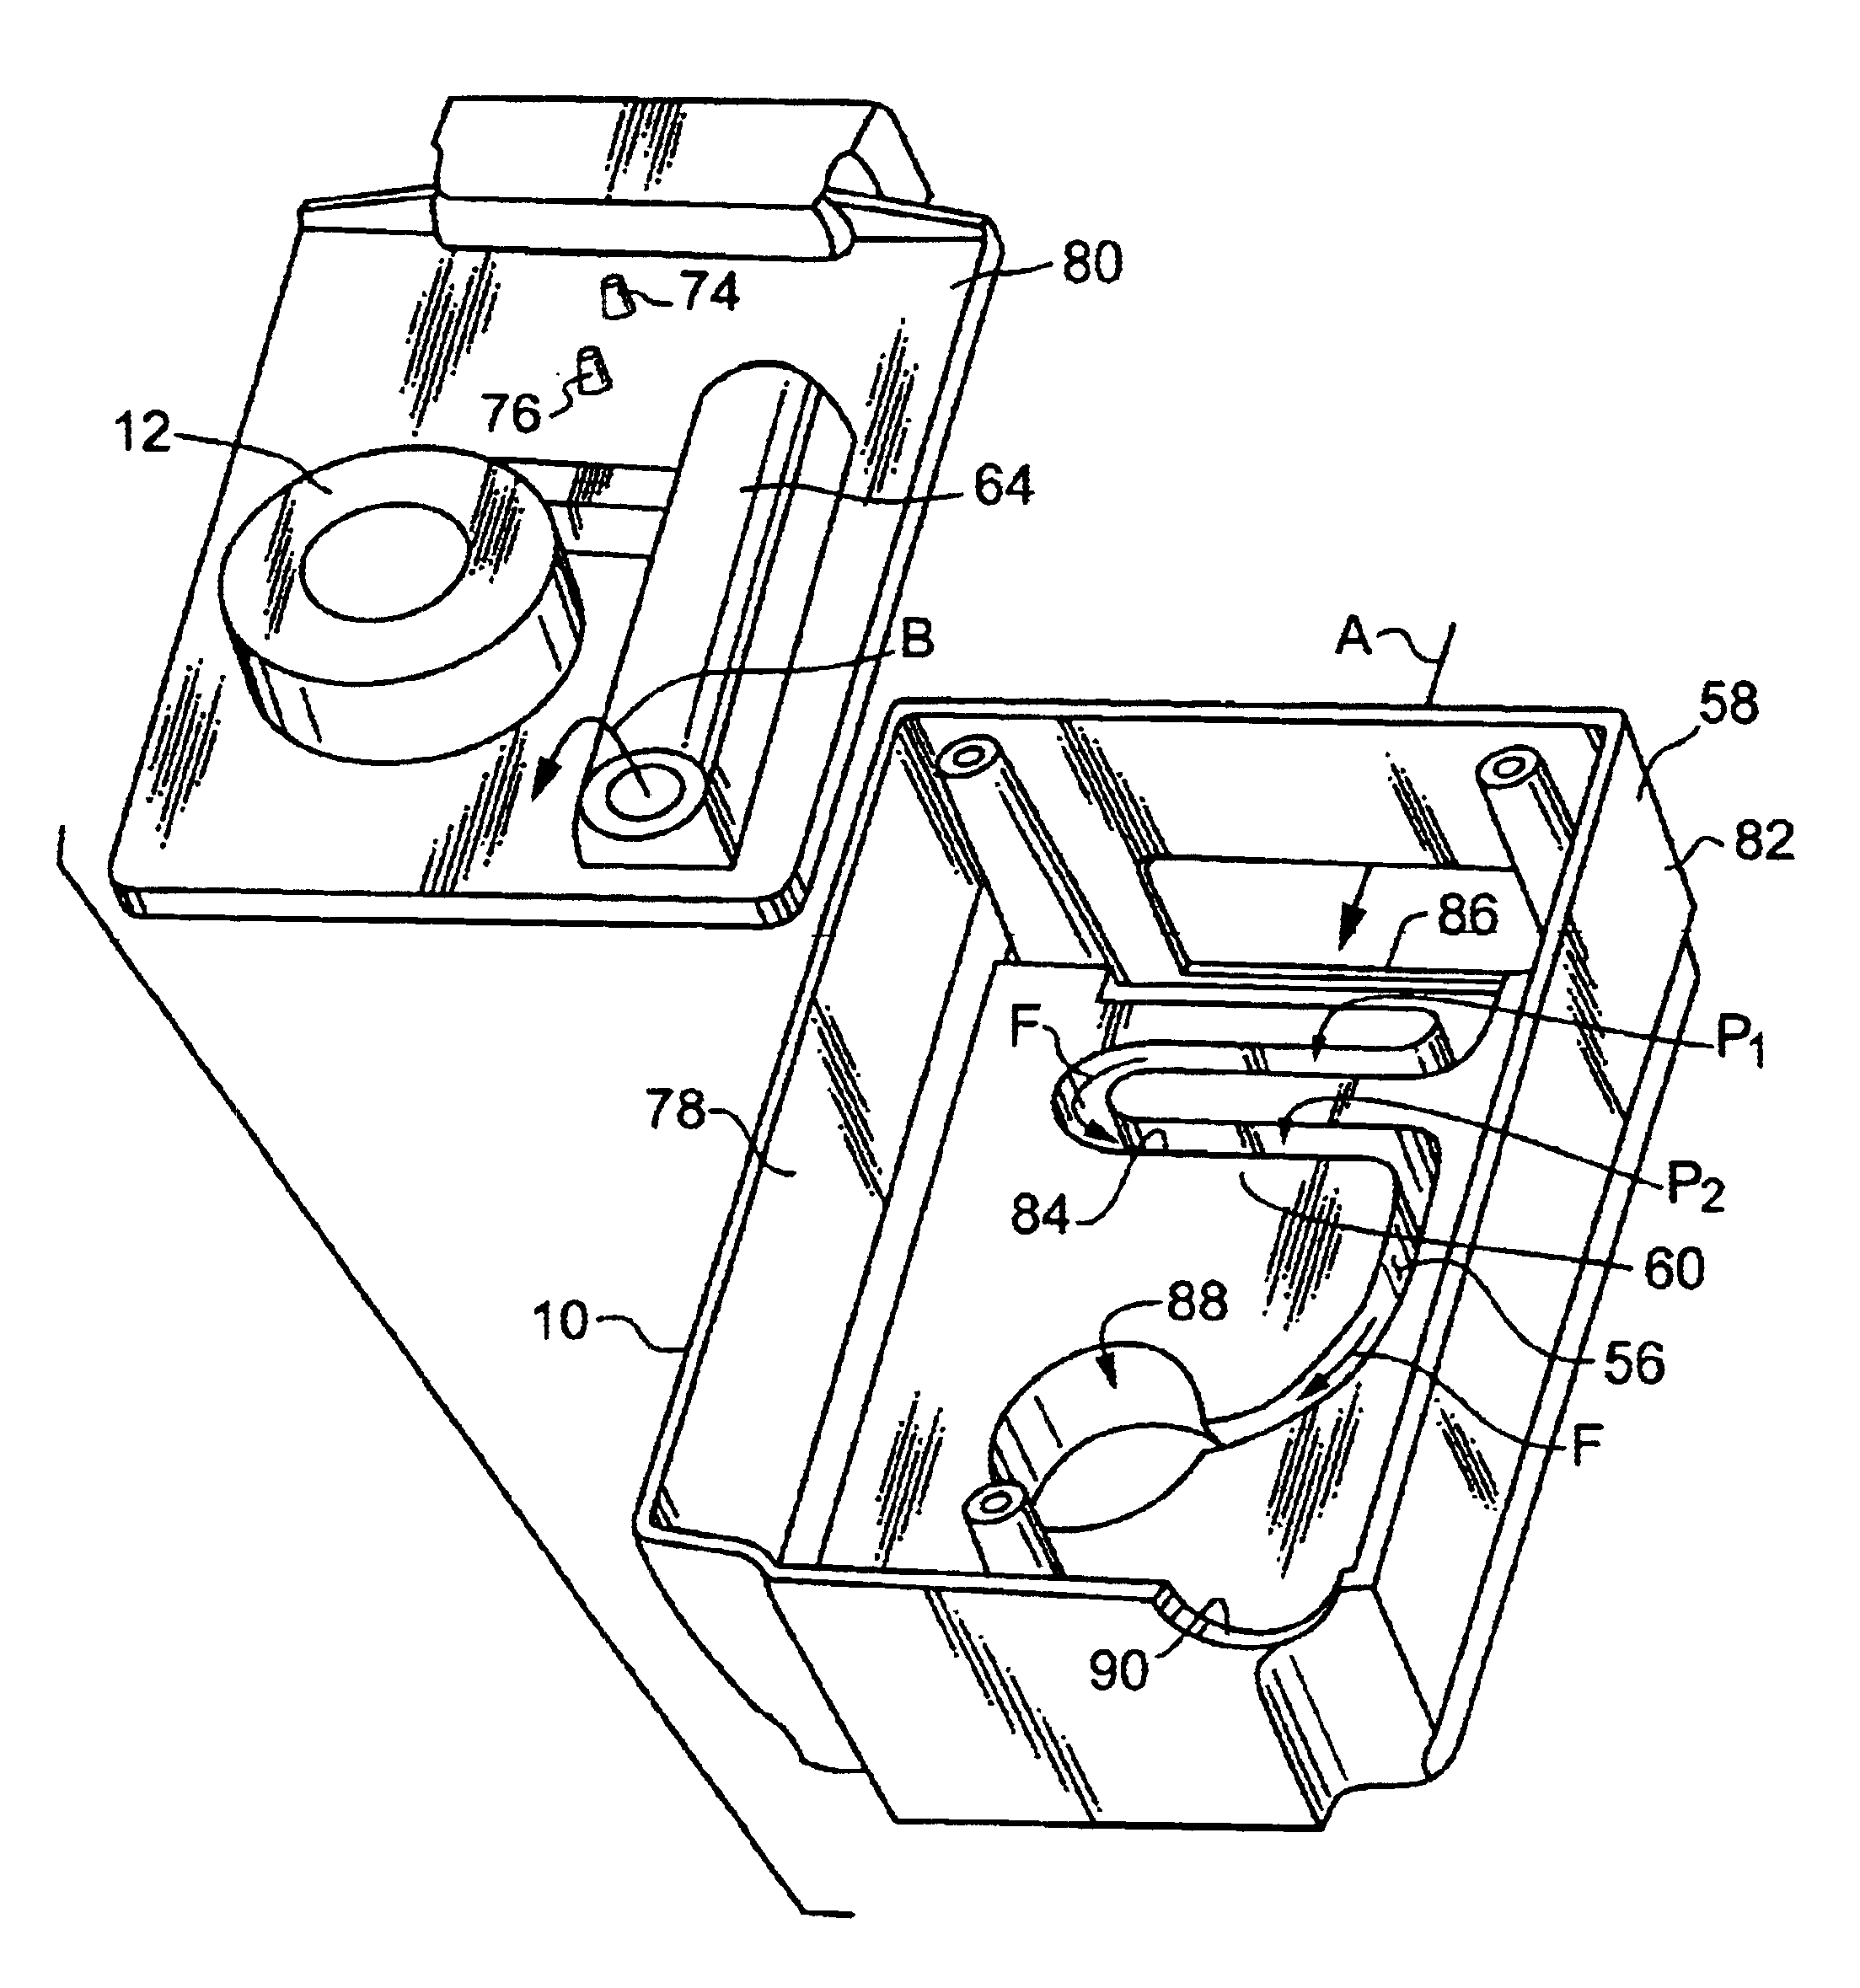 Monitoring fluid flow in a pressure support system